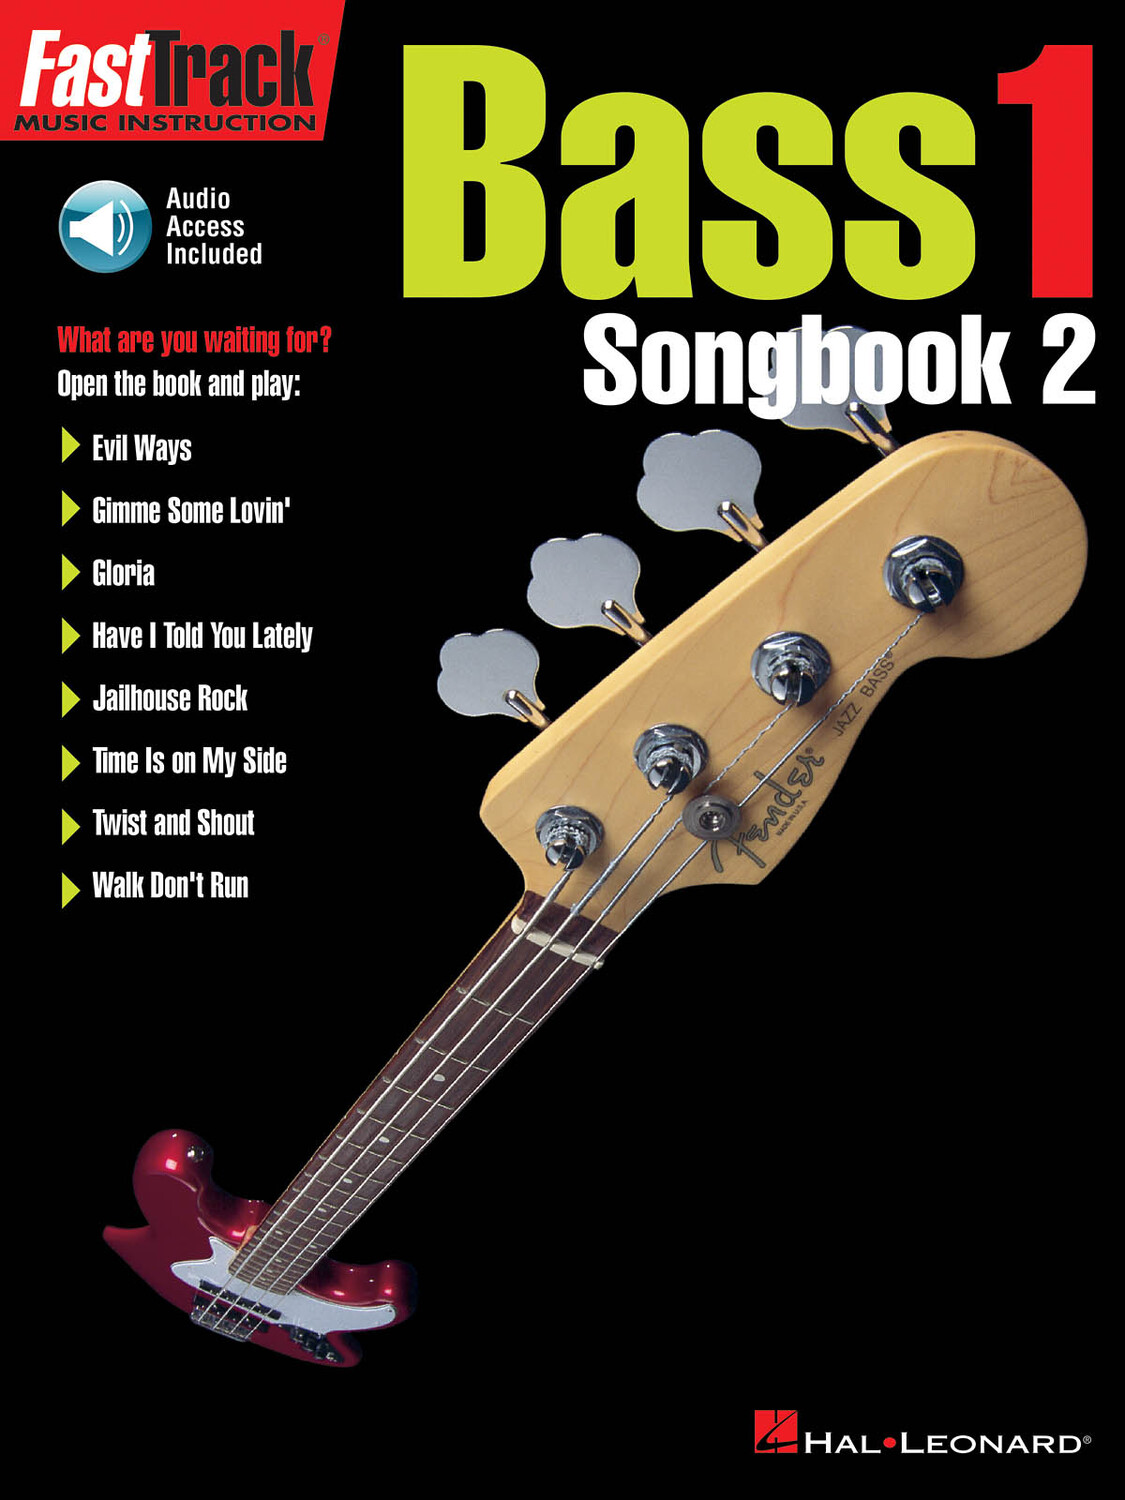 Cover: 73999953688 | FastTrack - Bass 1 - Songbook 2 | Fast Track Music Instruction